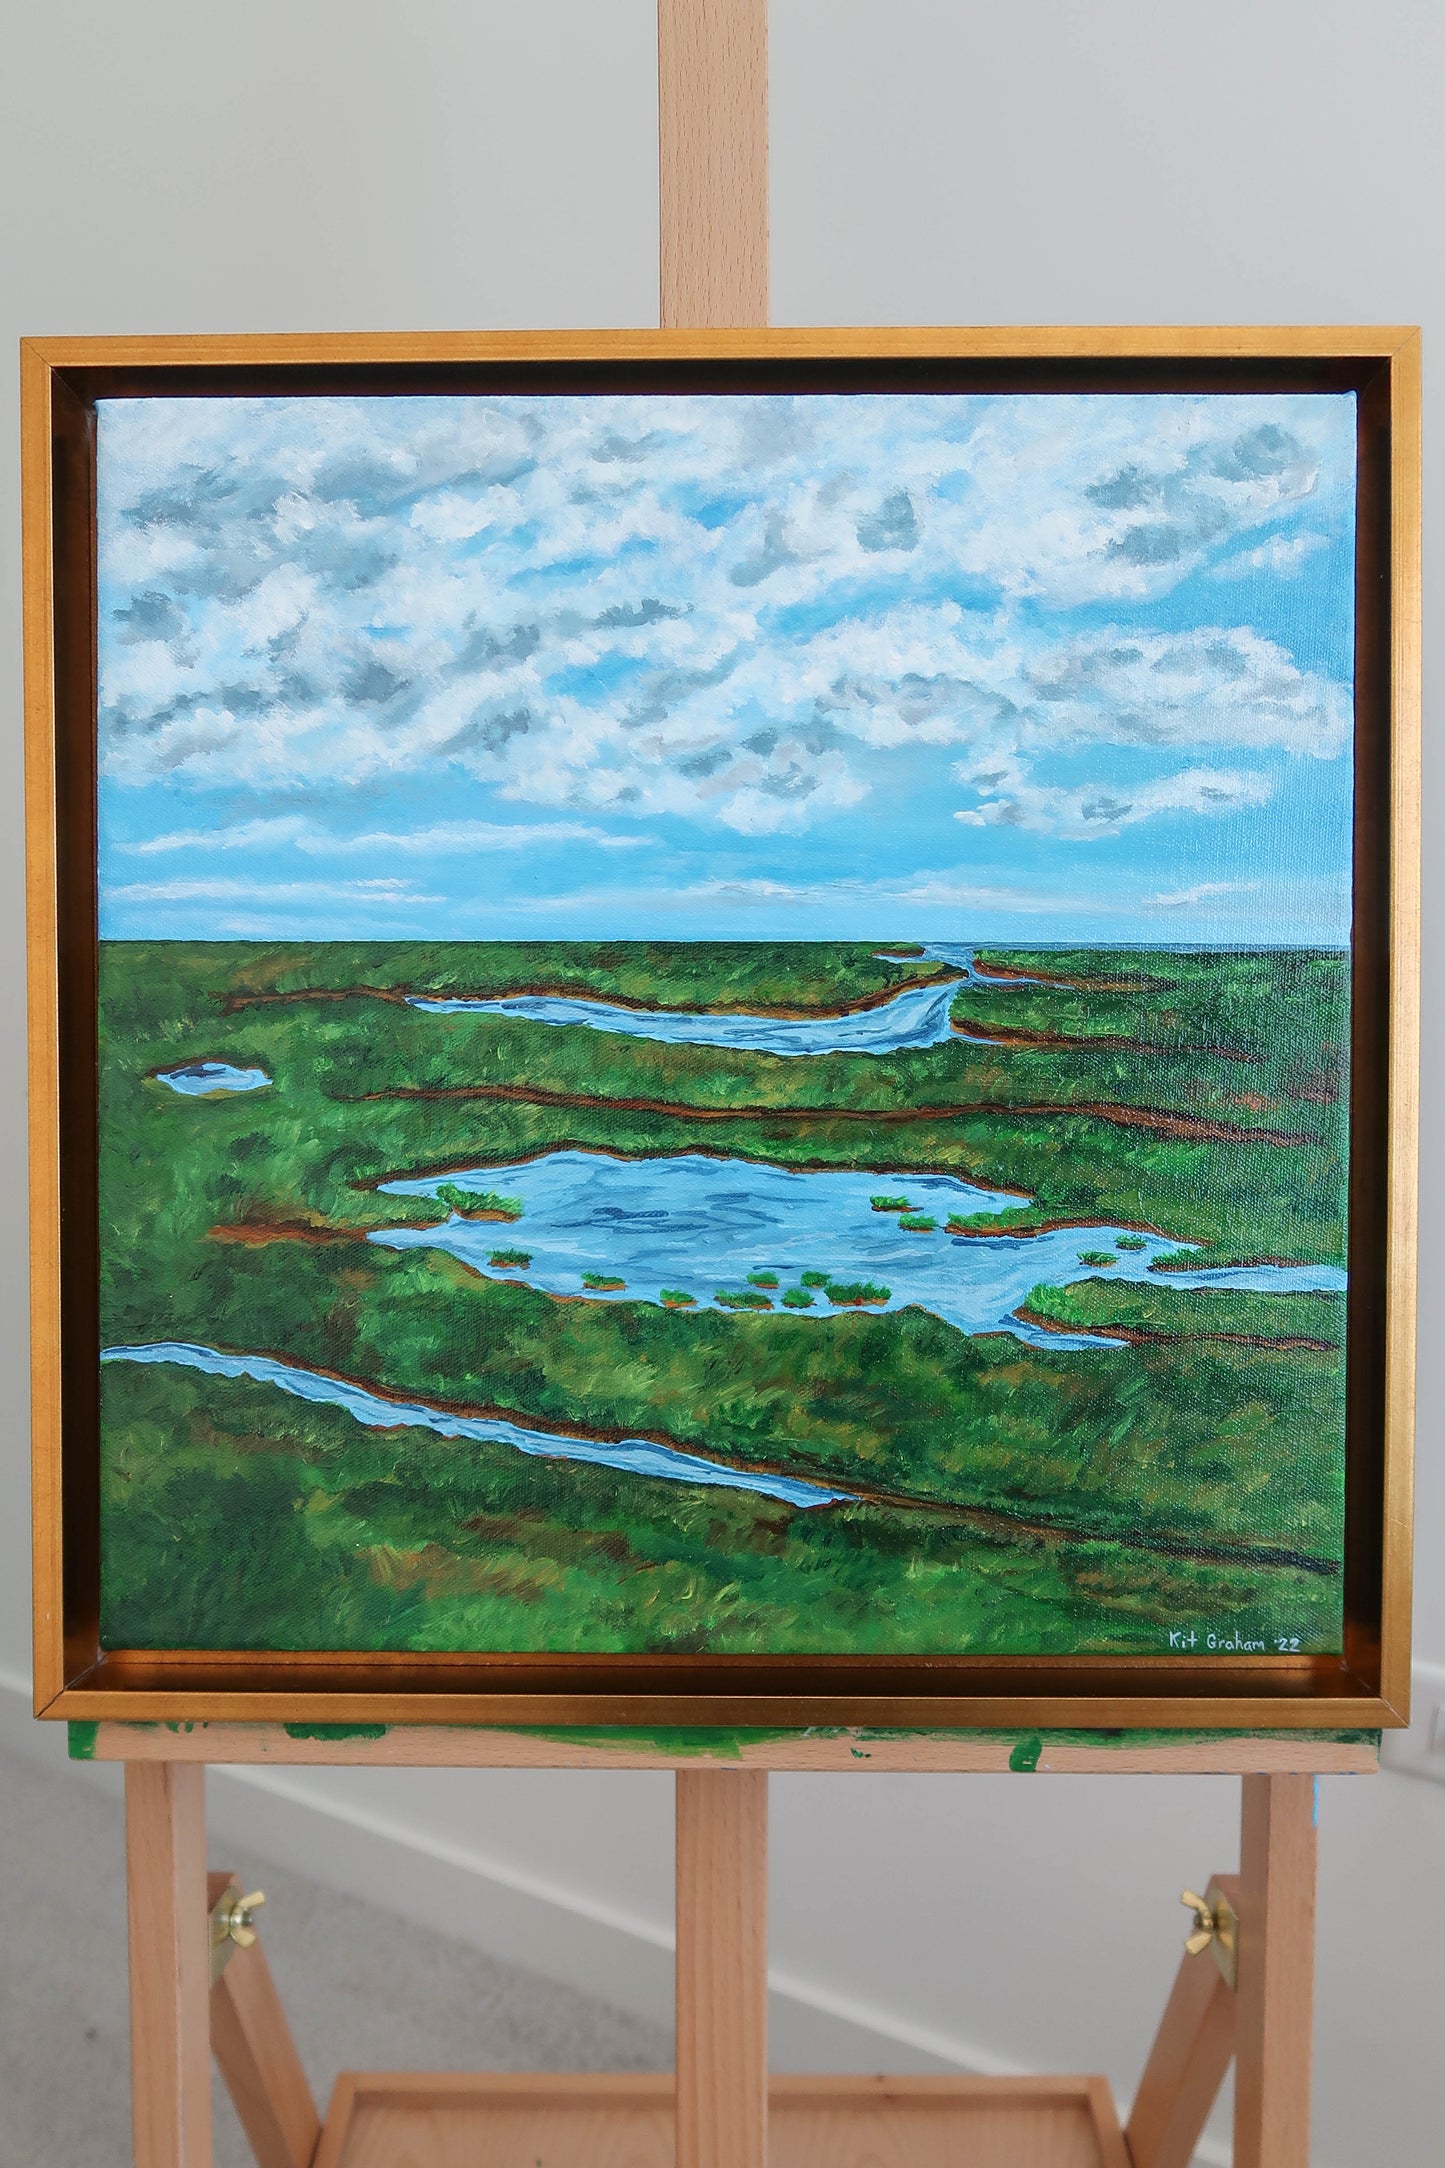 Marshes at Rachel Carson, Wells, Maine